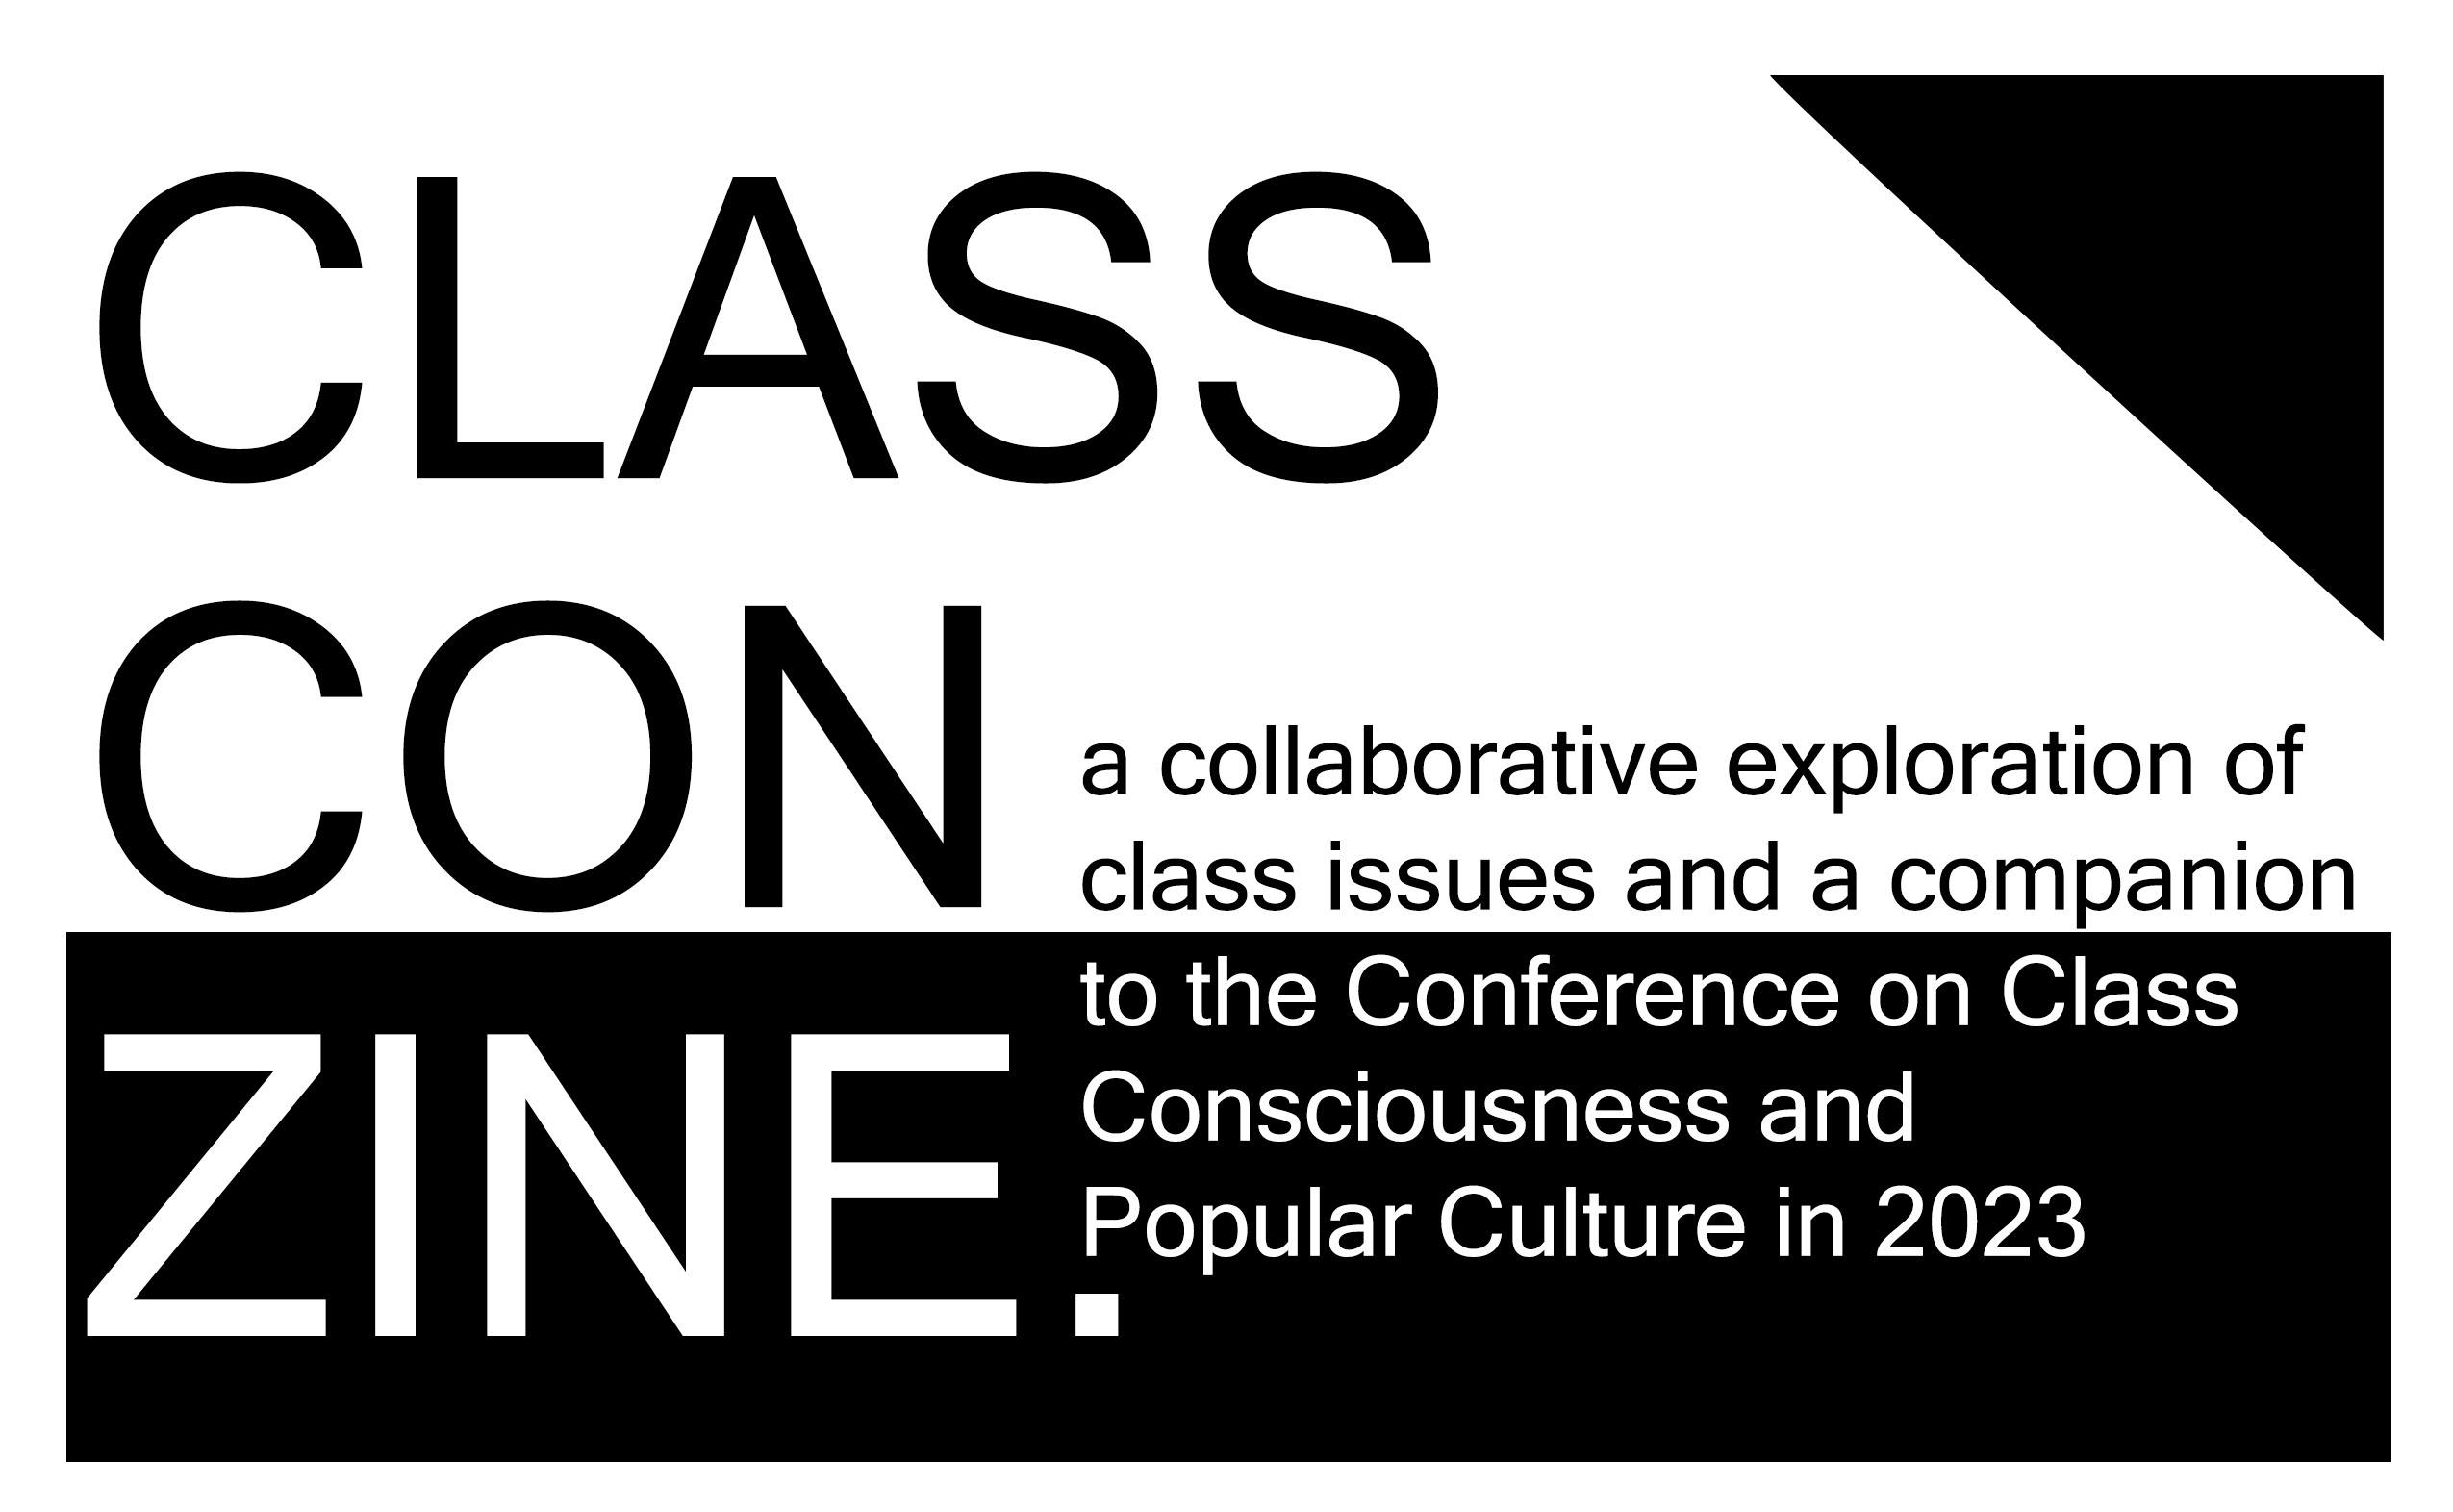 Class Con Zine - a collaborative exploration of class issues and a companion to the Conference on Class Consciousness and Popular Culture in 2023